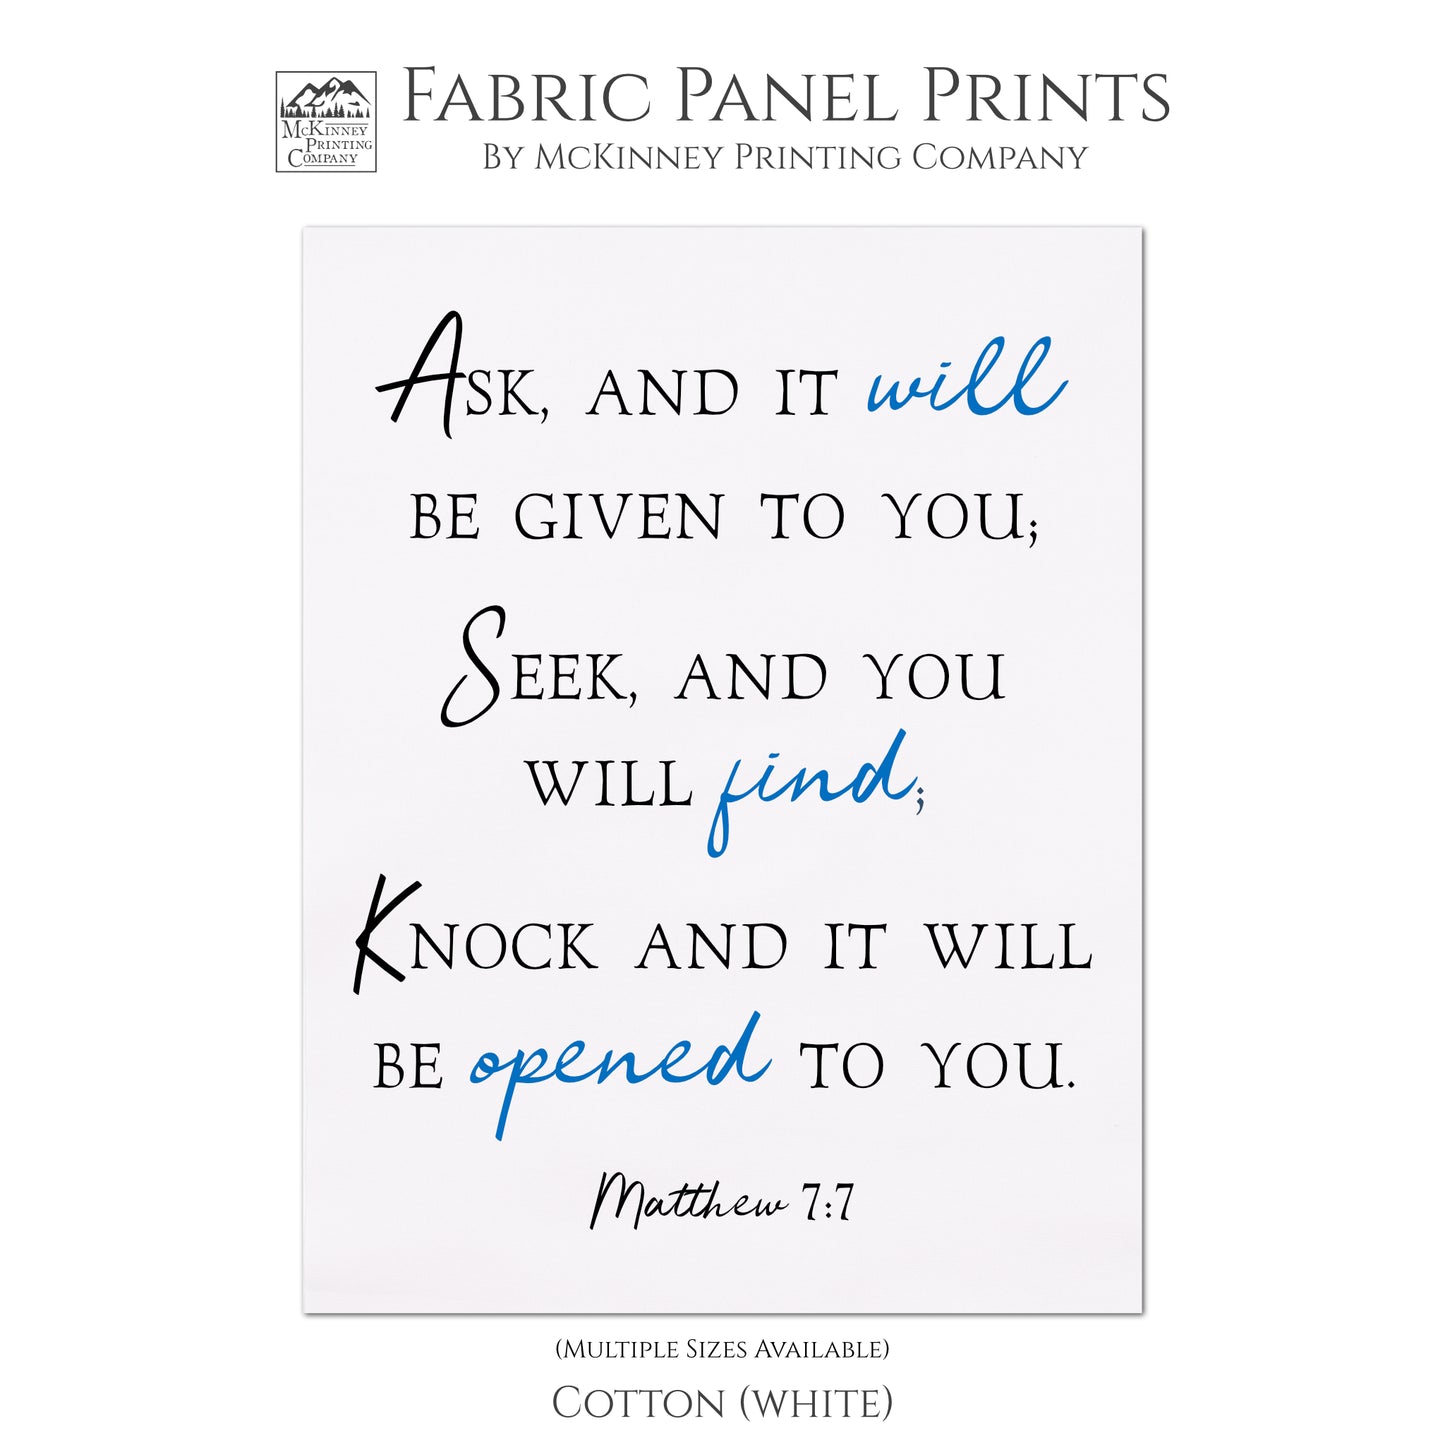 Ask, and it will be given to you; Seek, and you will find; Knock and it will be opened to you. - Matthew 7 7 - Fabric Panel Print, Wall Hanging, Scripture Fabric, Religious Fabric, Quilt Block - Cotton, White